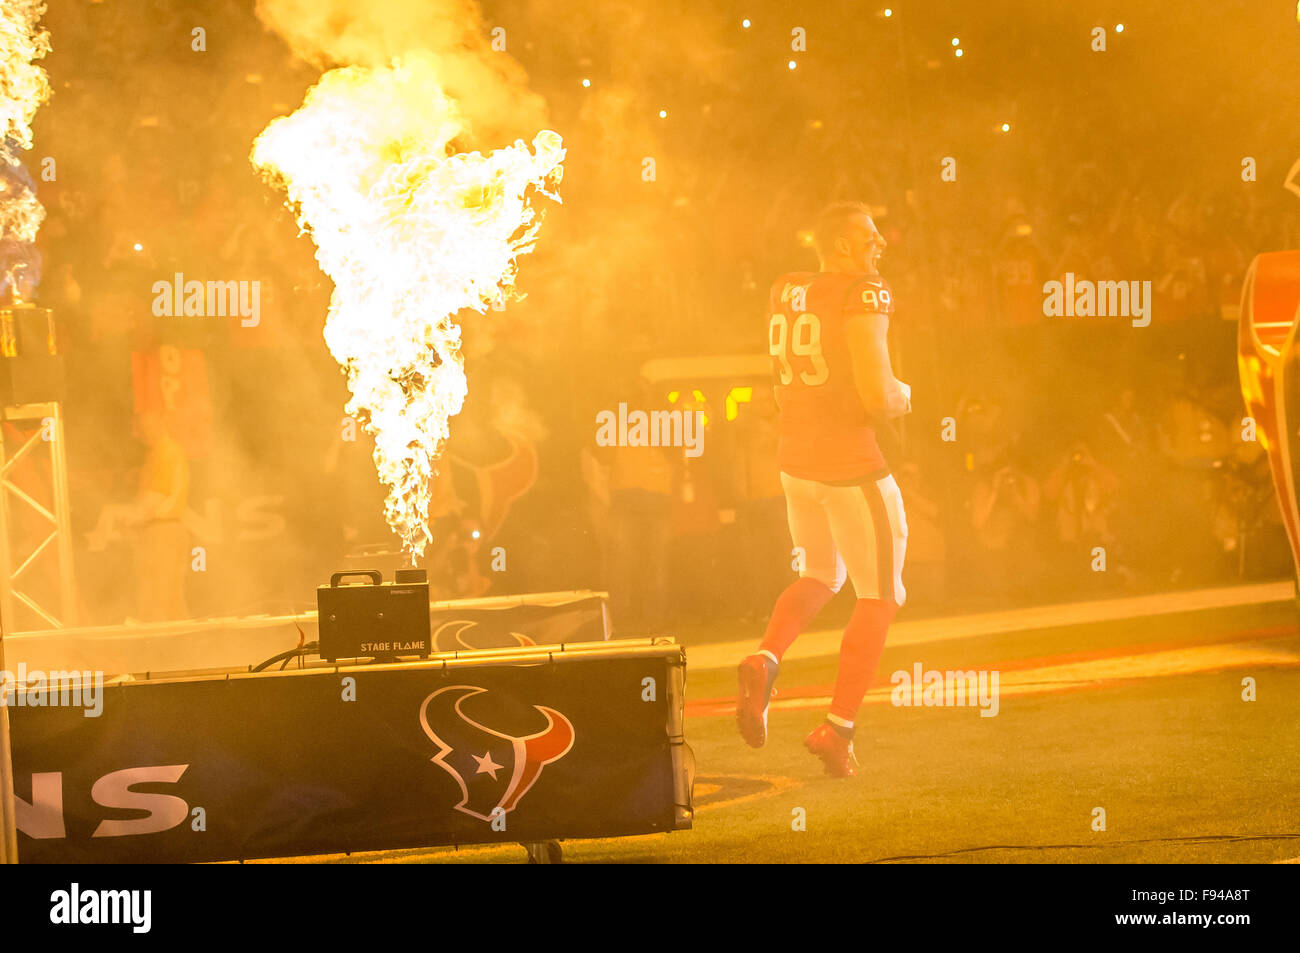 Houston, TX, USA. 13th Dec, 2015. Houston Texans defensive end J.J. Watt (99) takes the field during the NFL Sunday night football game between the New England Patriots and the Houston Texans at NRG Stadium in Houston, TX. Rudy Hardy/CSM/Alamy Live News Stock Photo